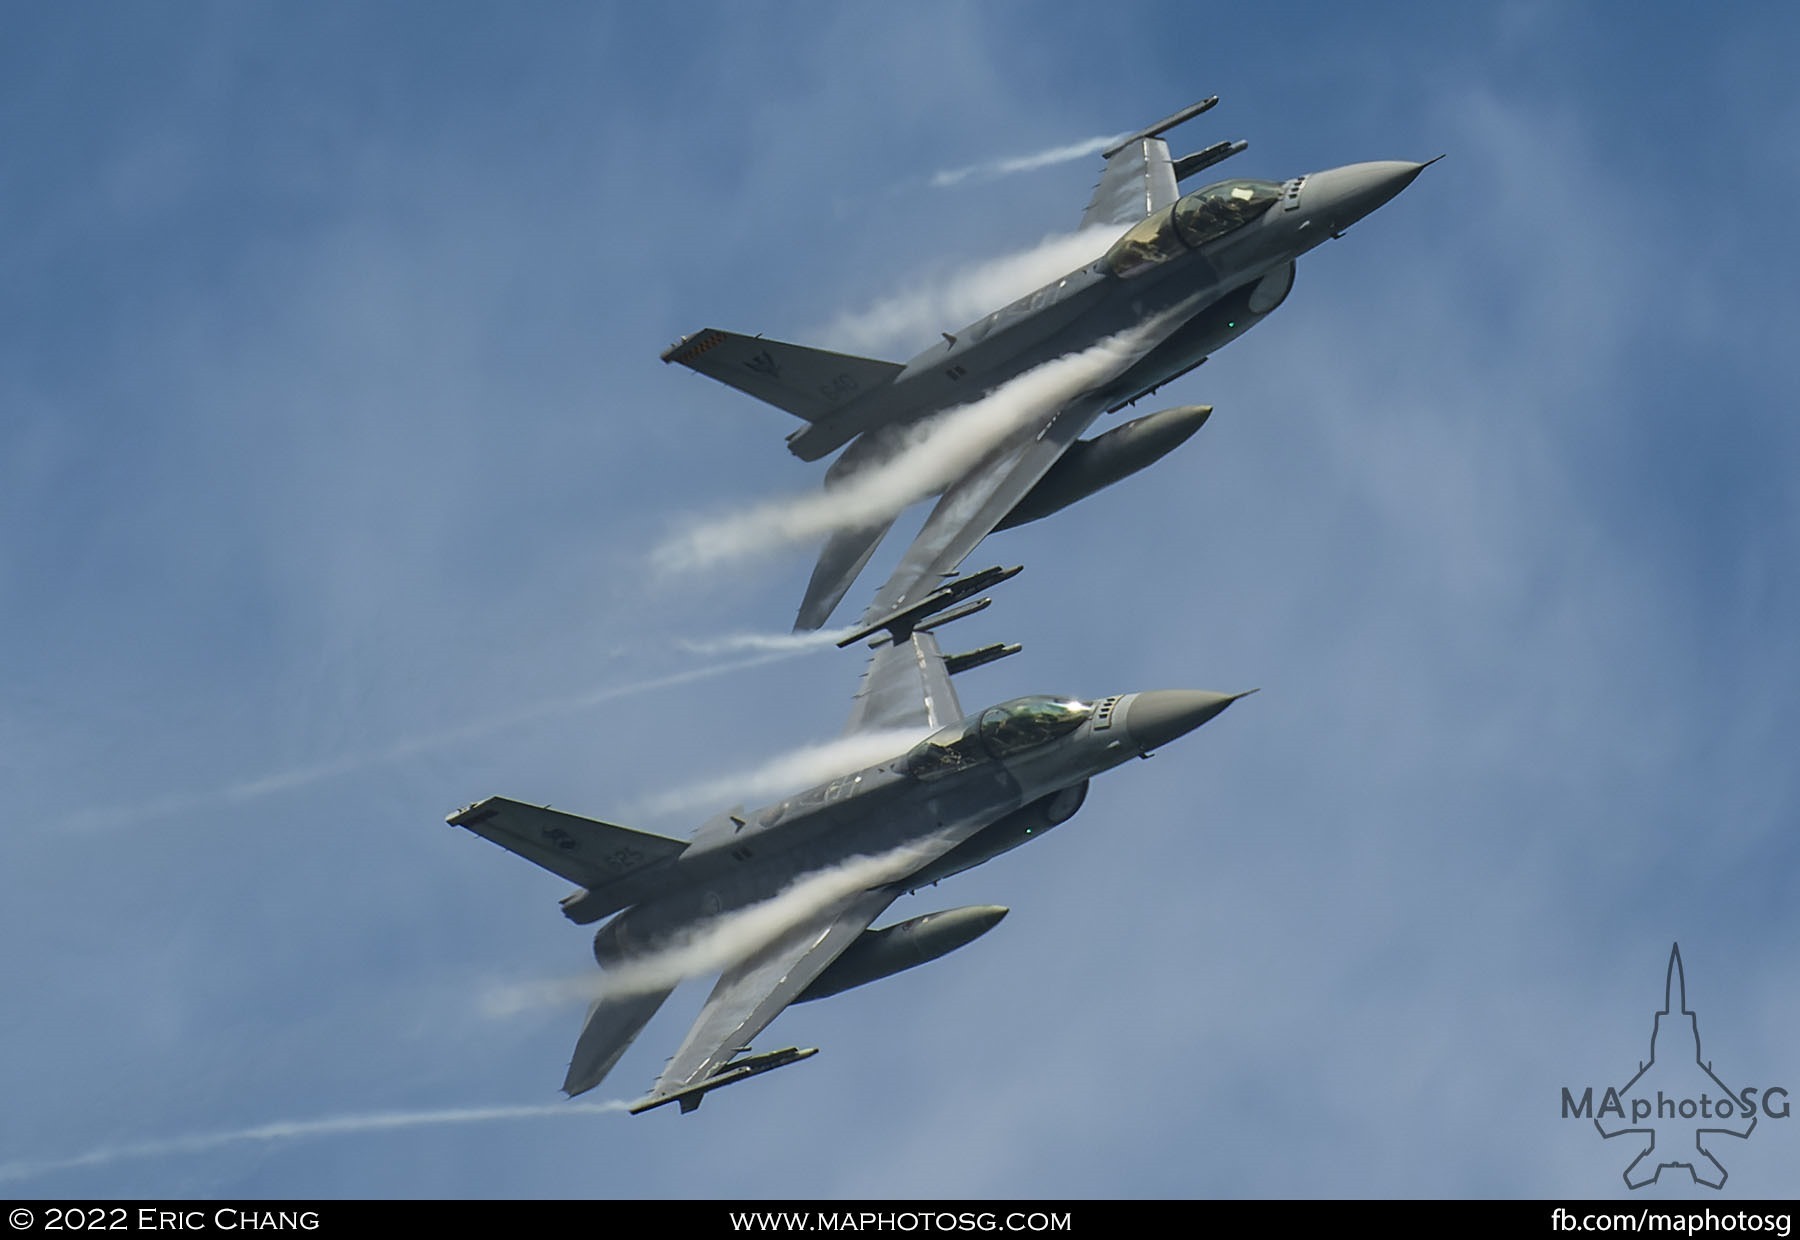 A pair of F-16Ds pulling Gs in formation.